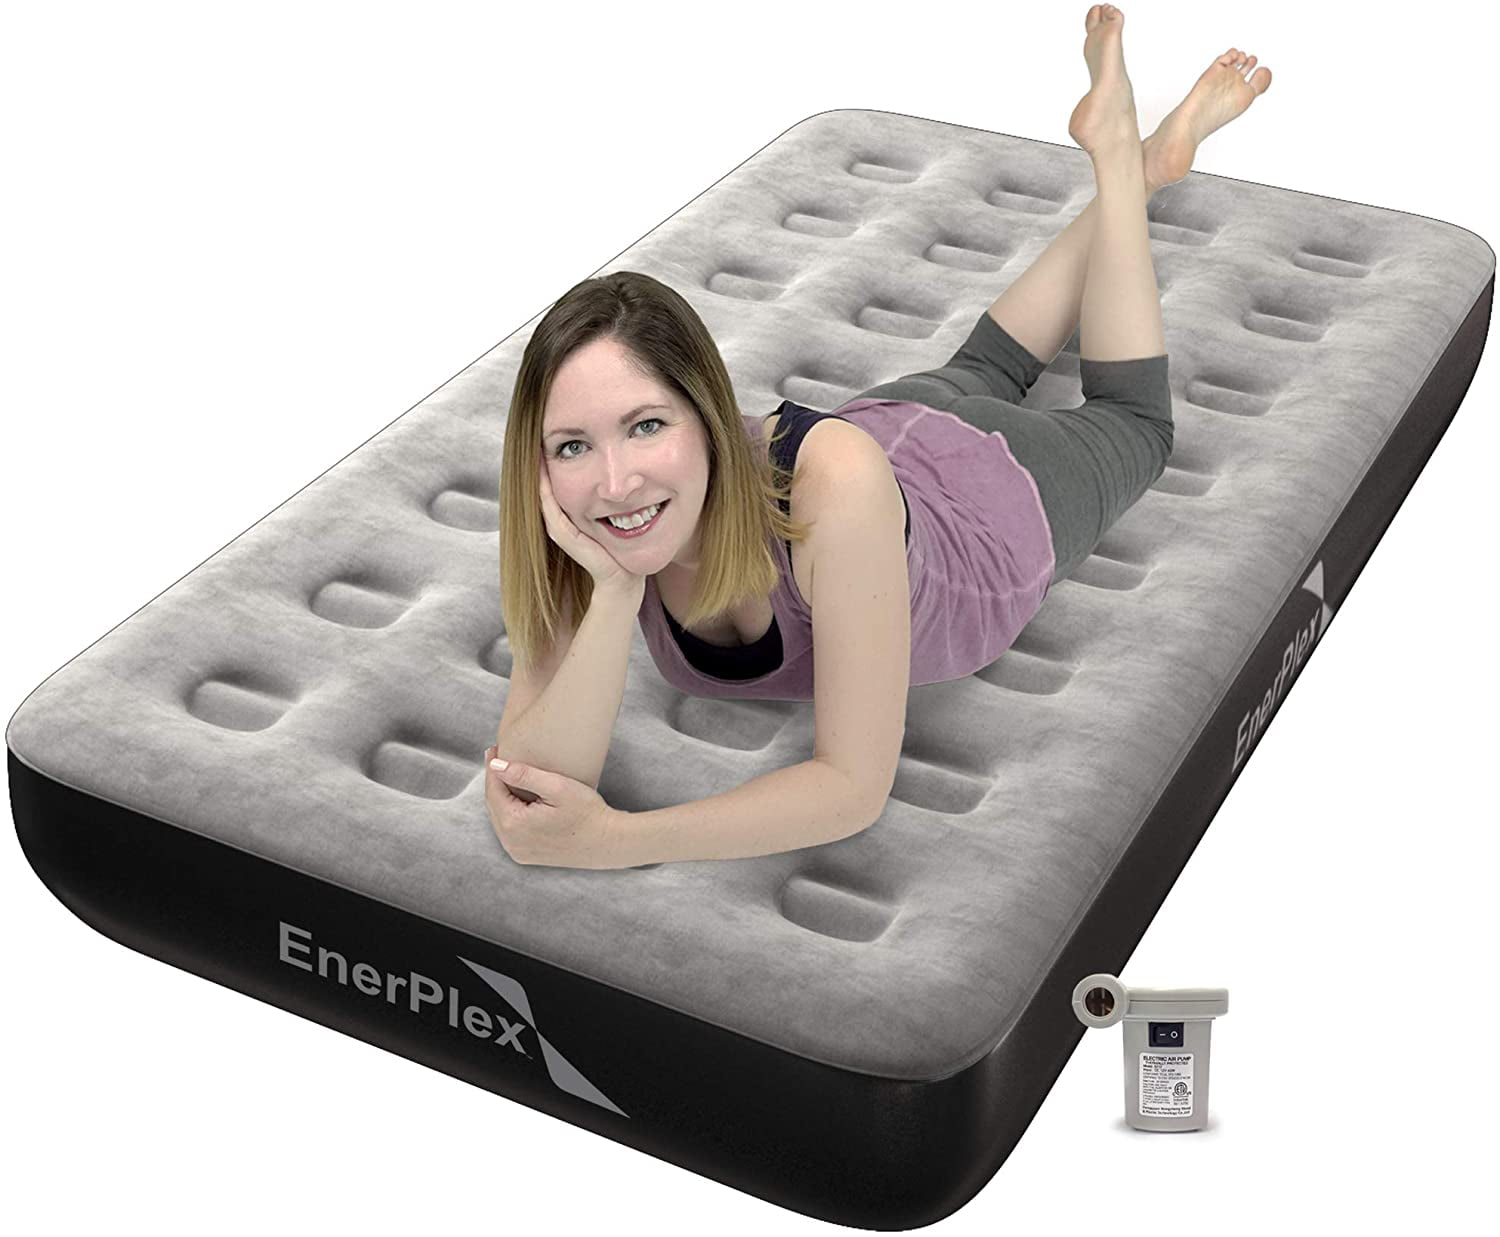 Enerplex Luxury 9 Inch Twin Air, Aerobed Classic Single High Twin Size Air Bed